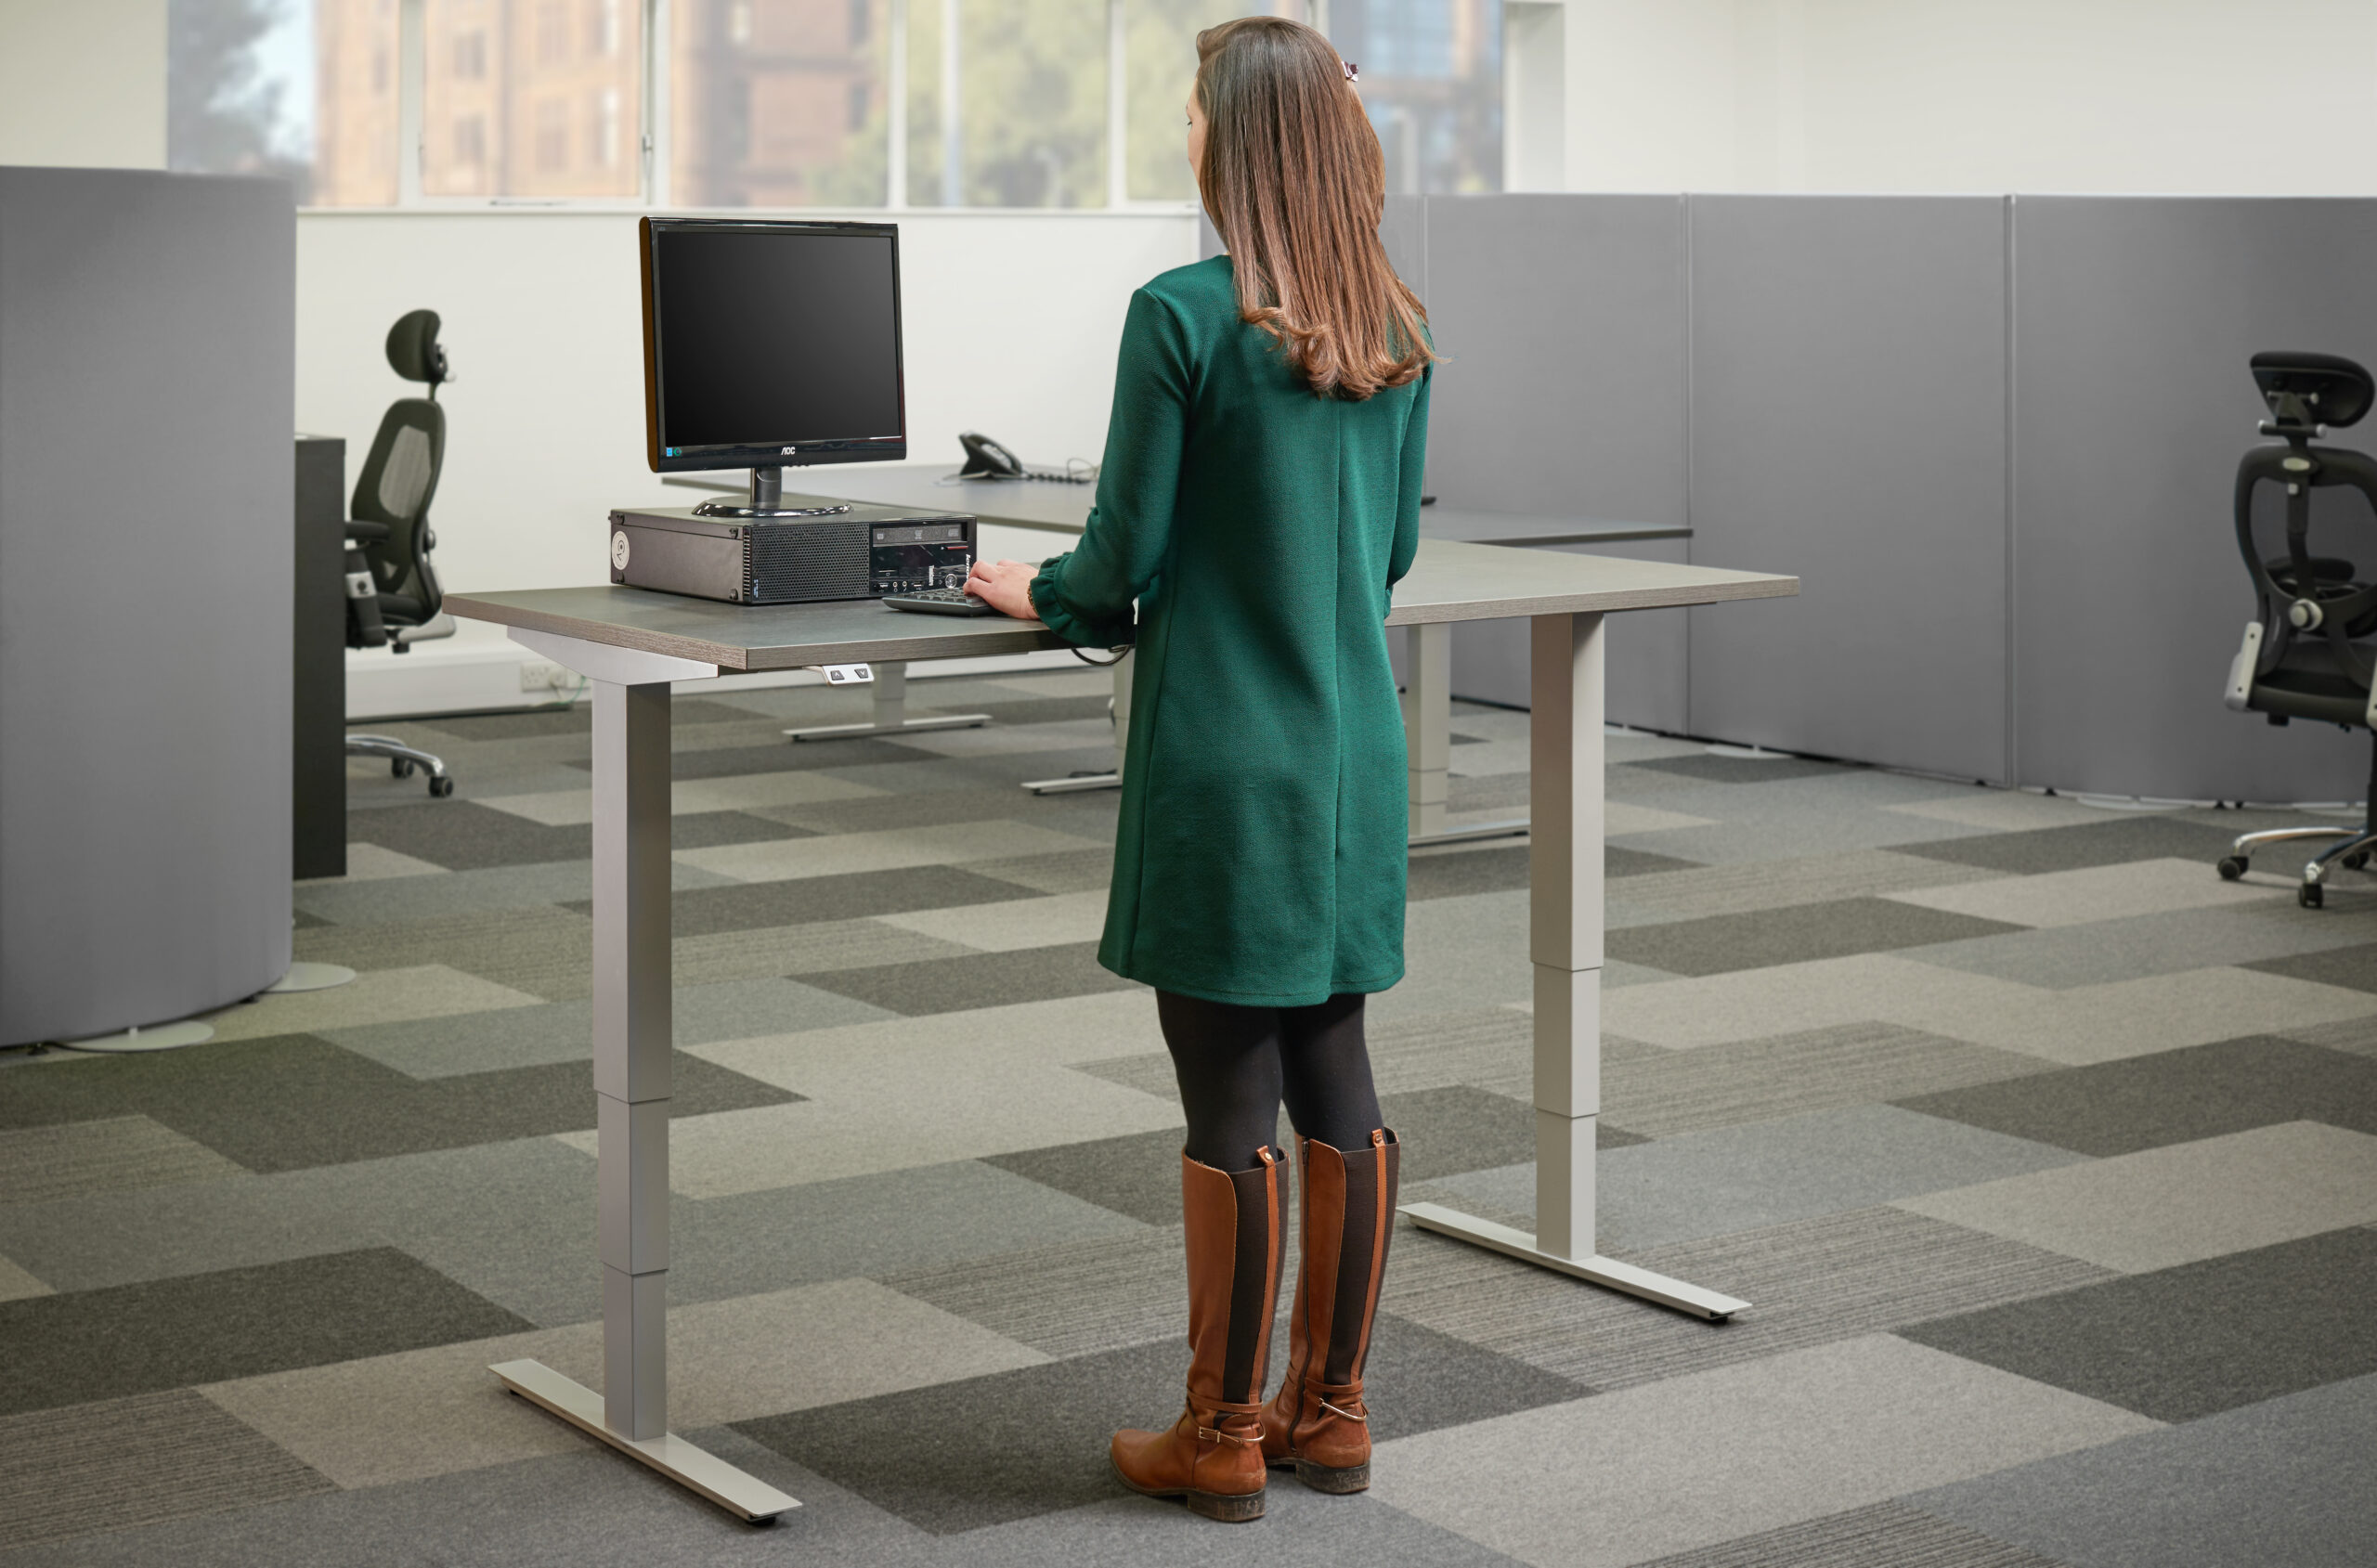 Standing Desks: Why should we use them?